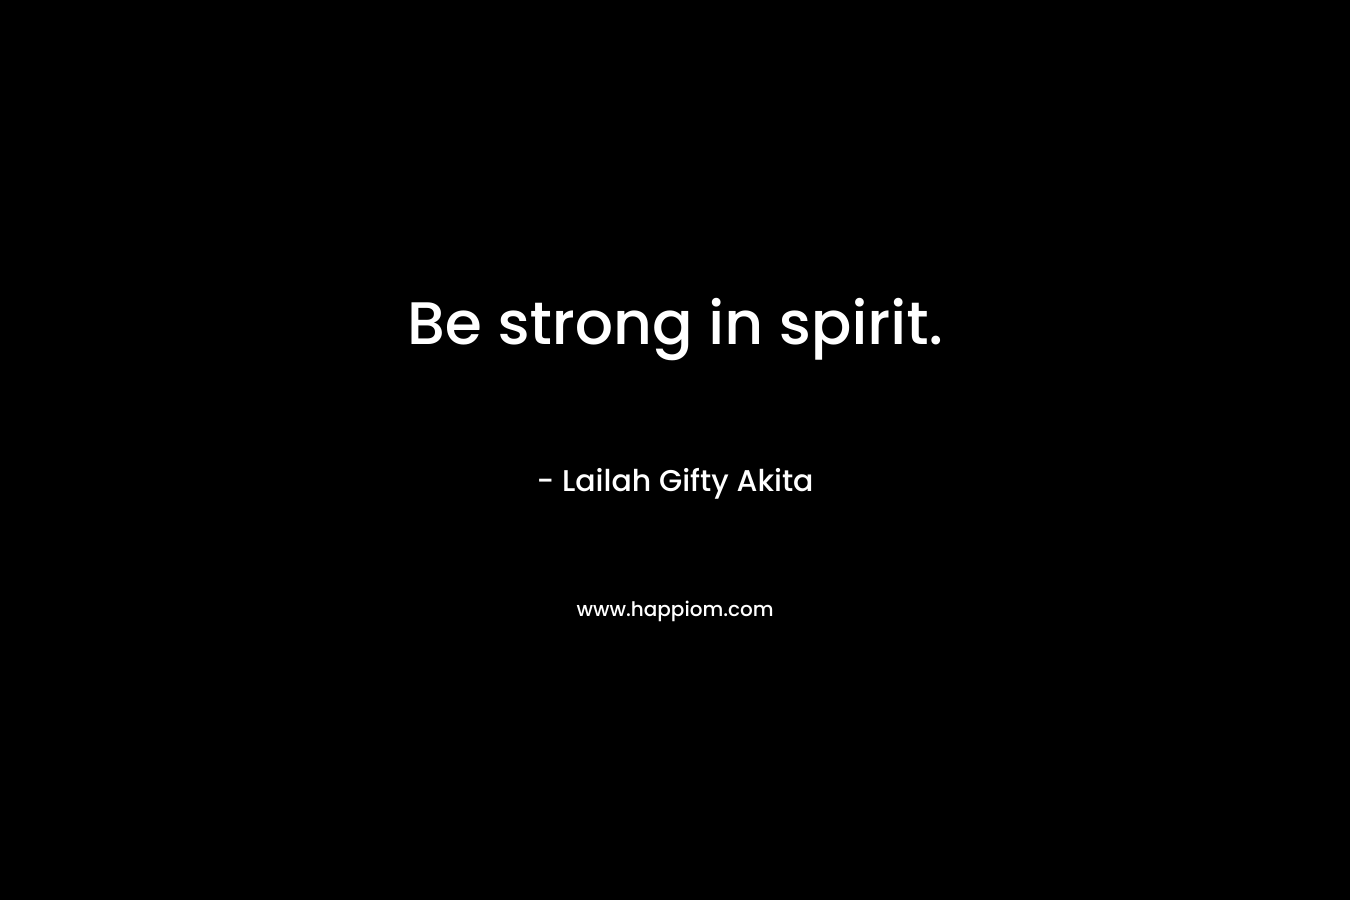 Be strong in spirit.